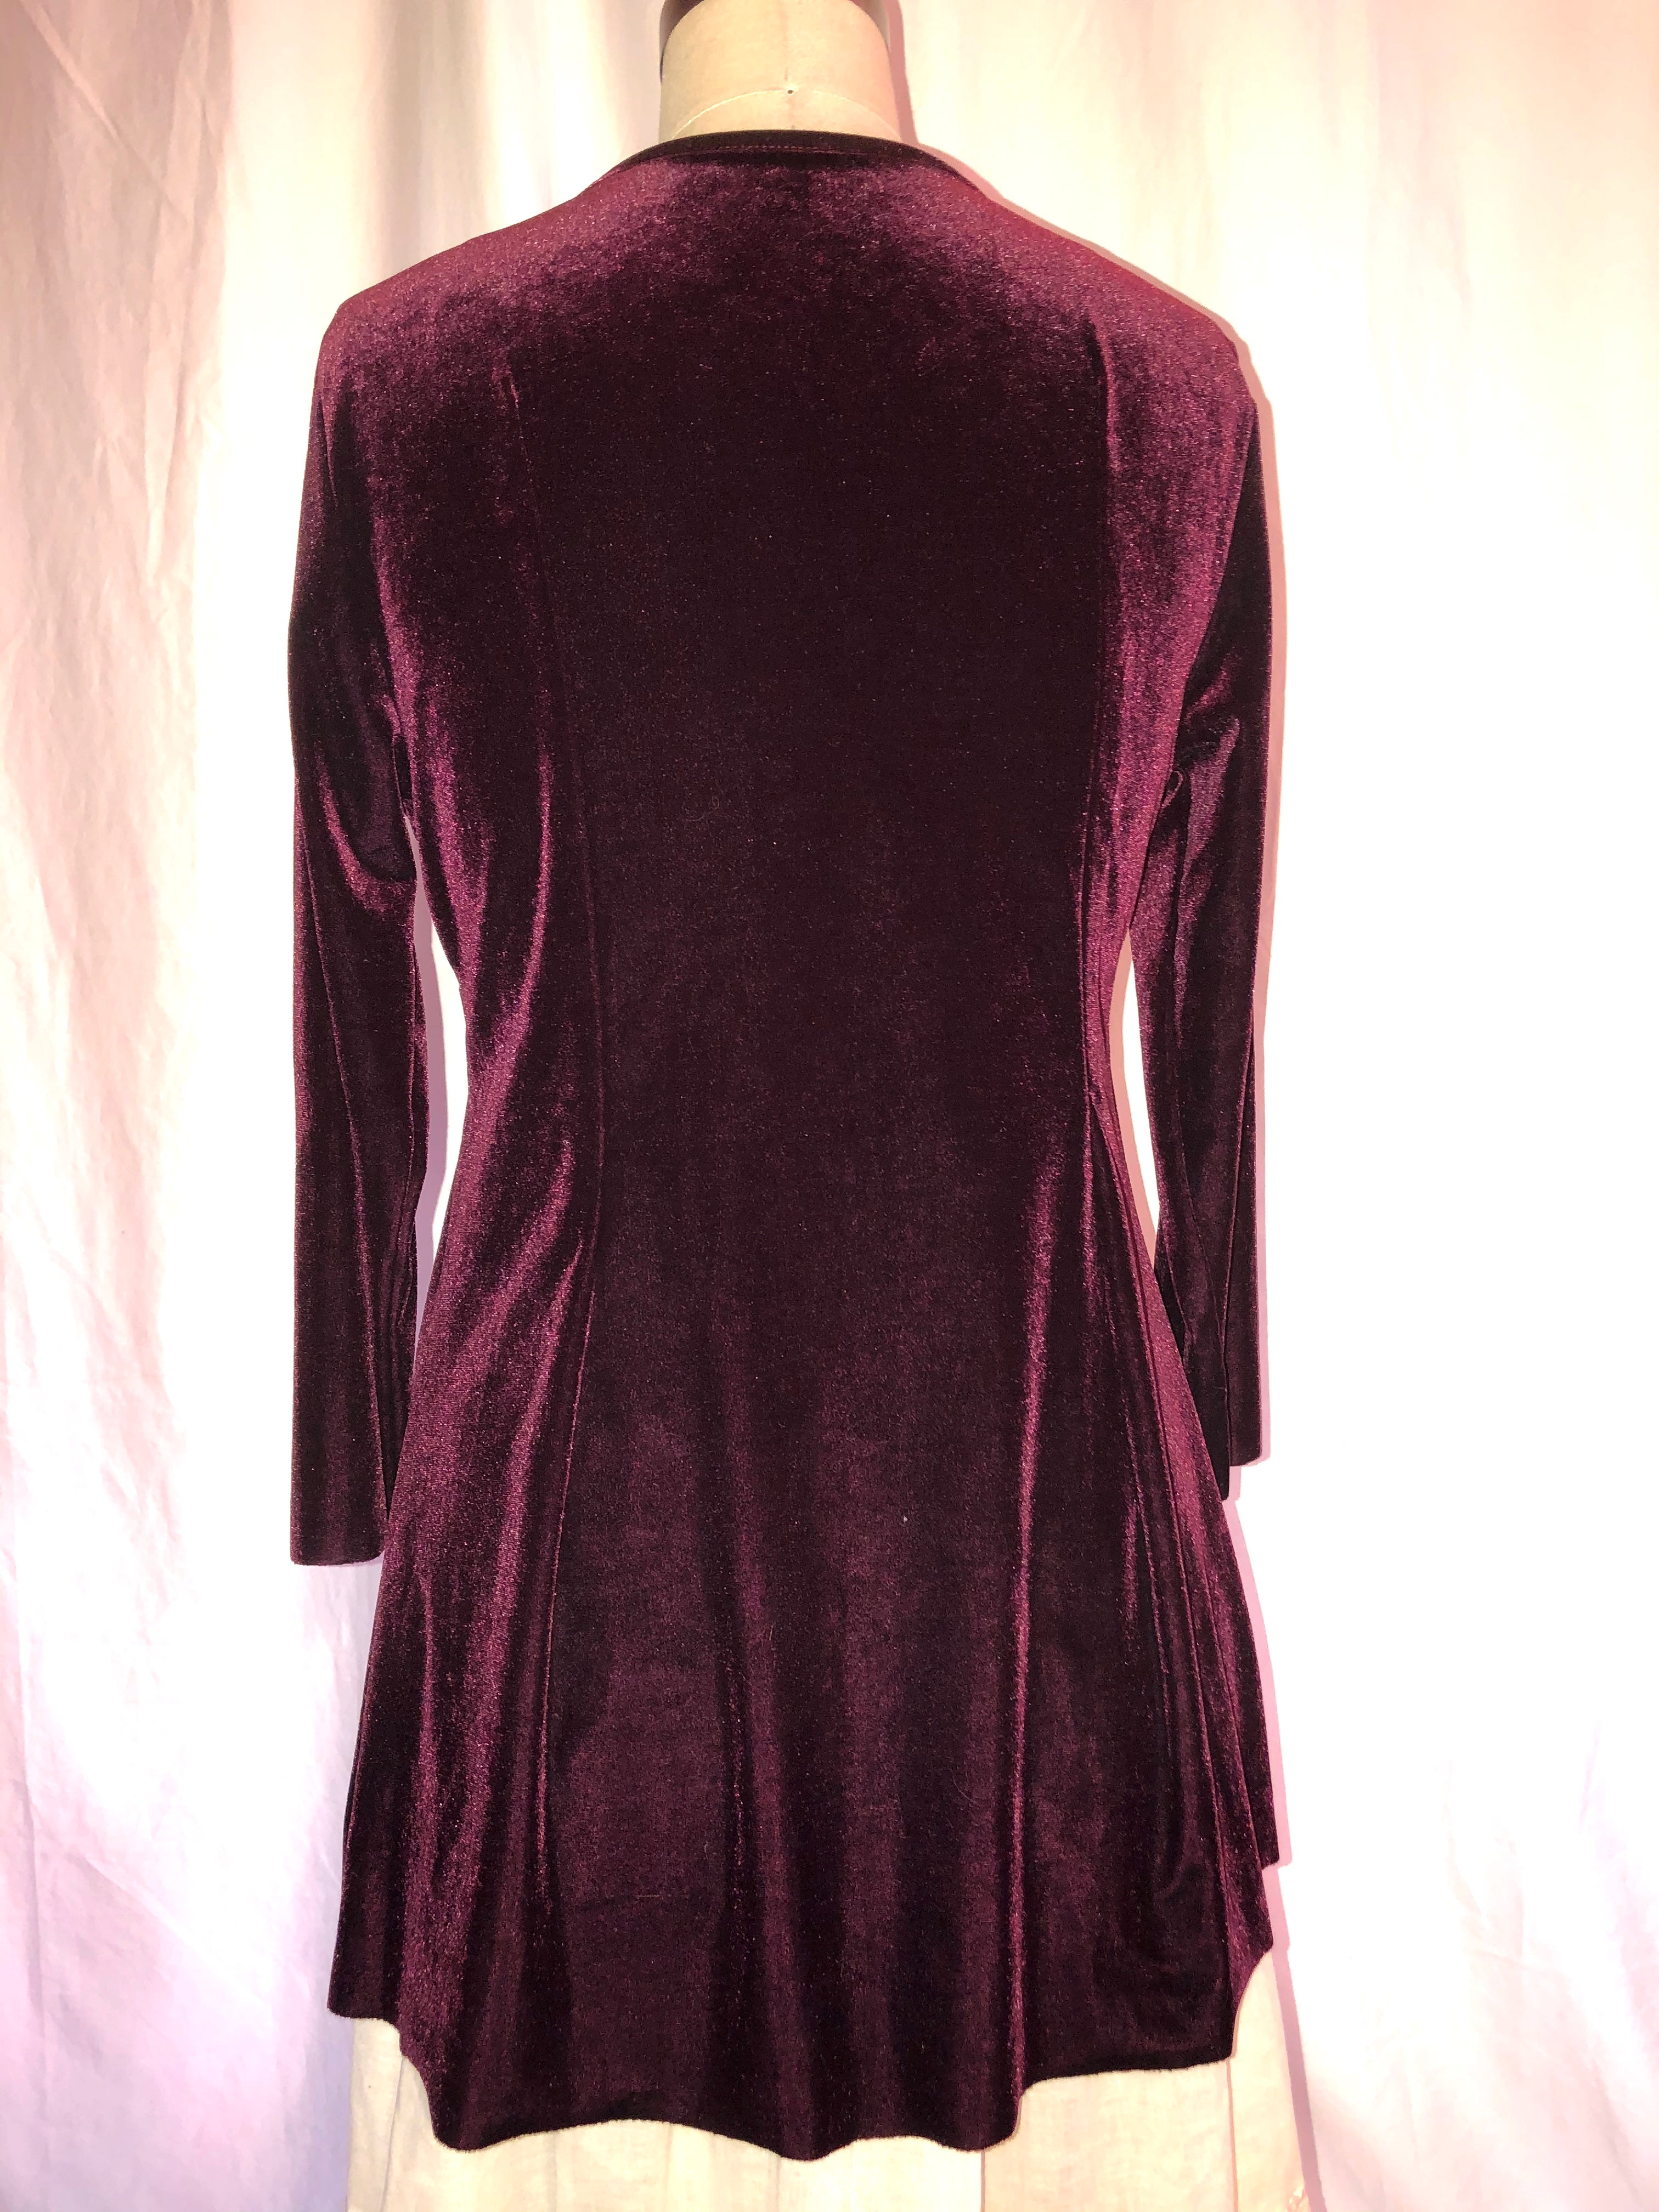 Burgundy/Cherry Colored Babydoll Top